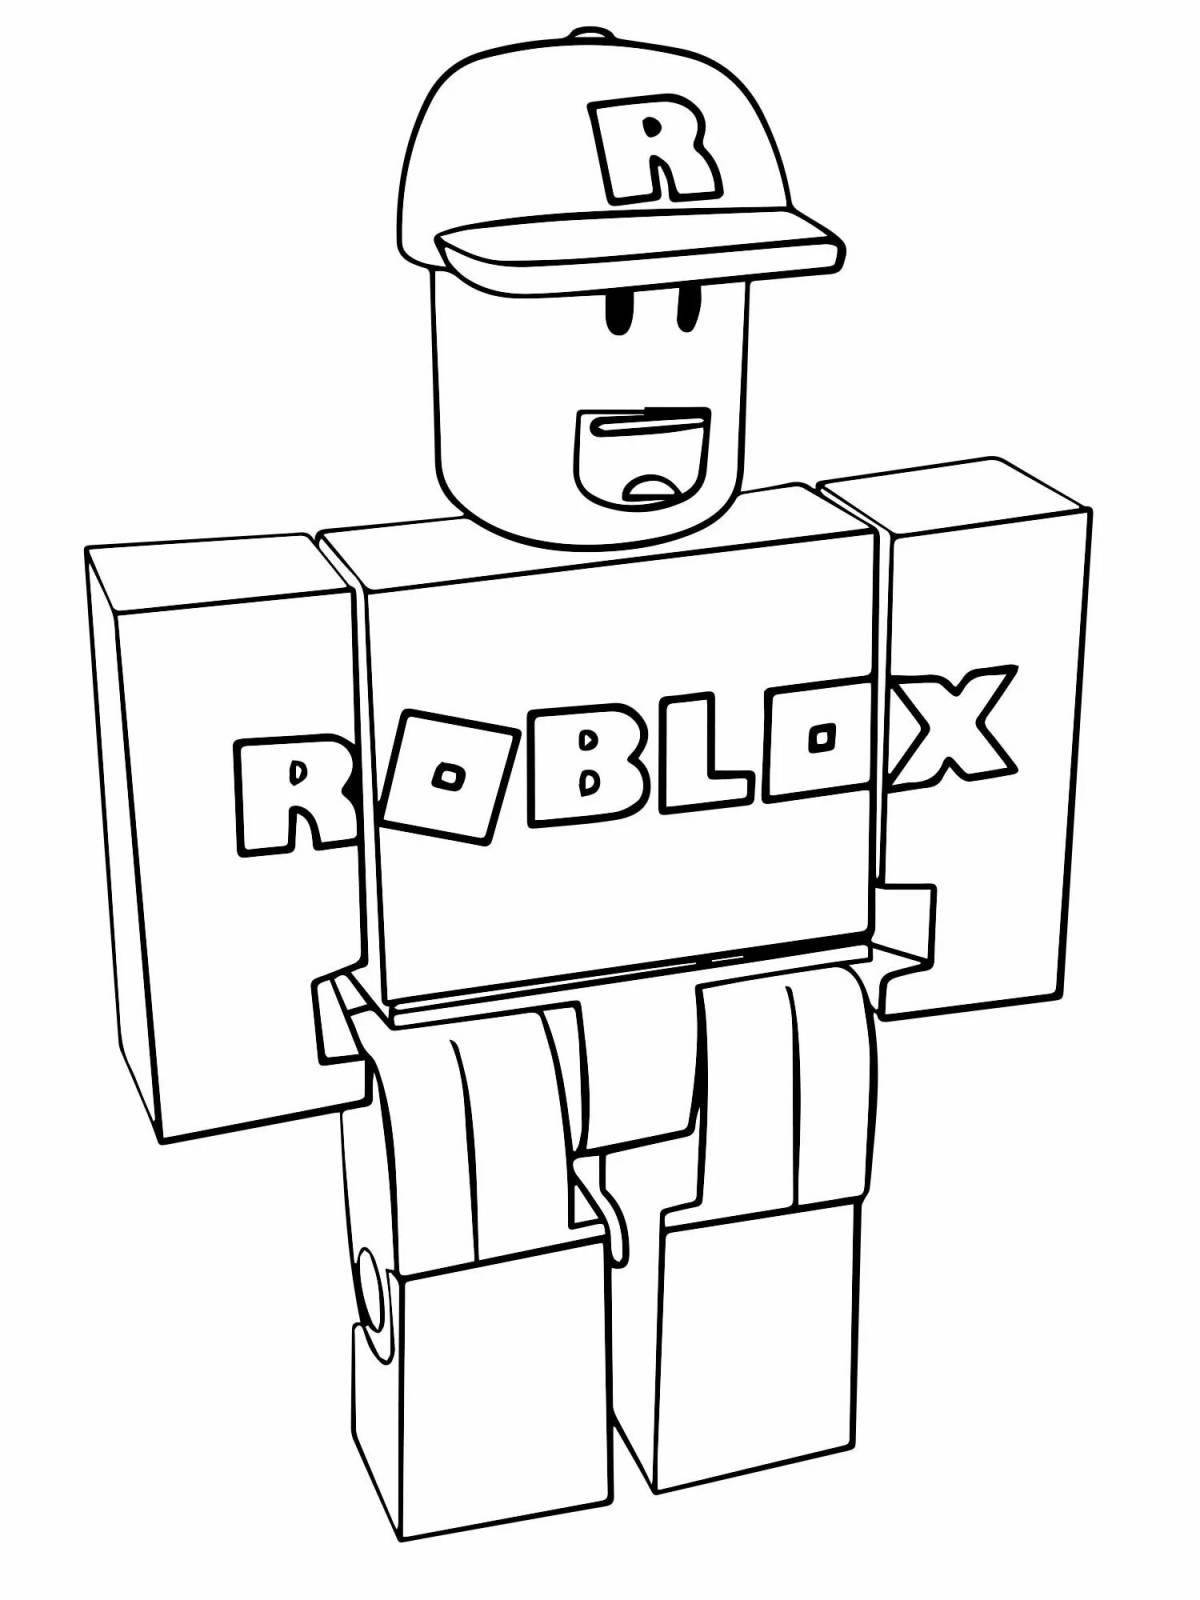 Roblox fun coloring book for 10 year old boys